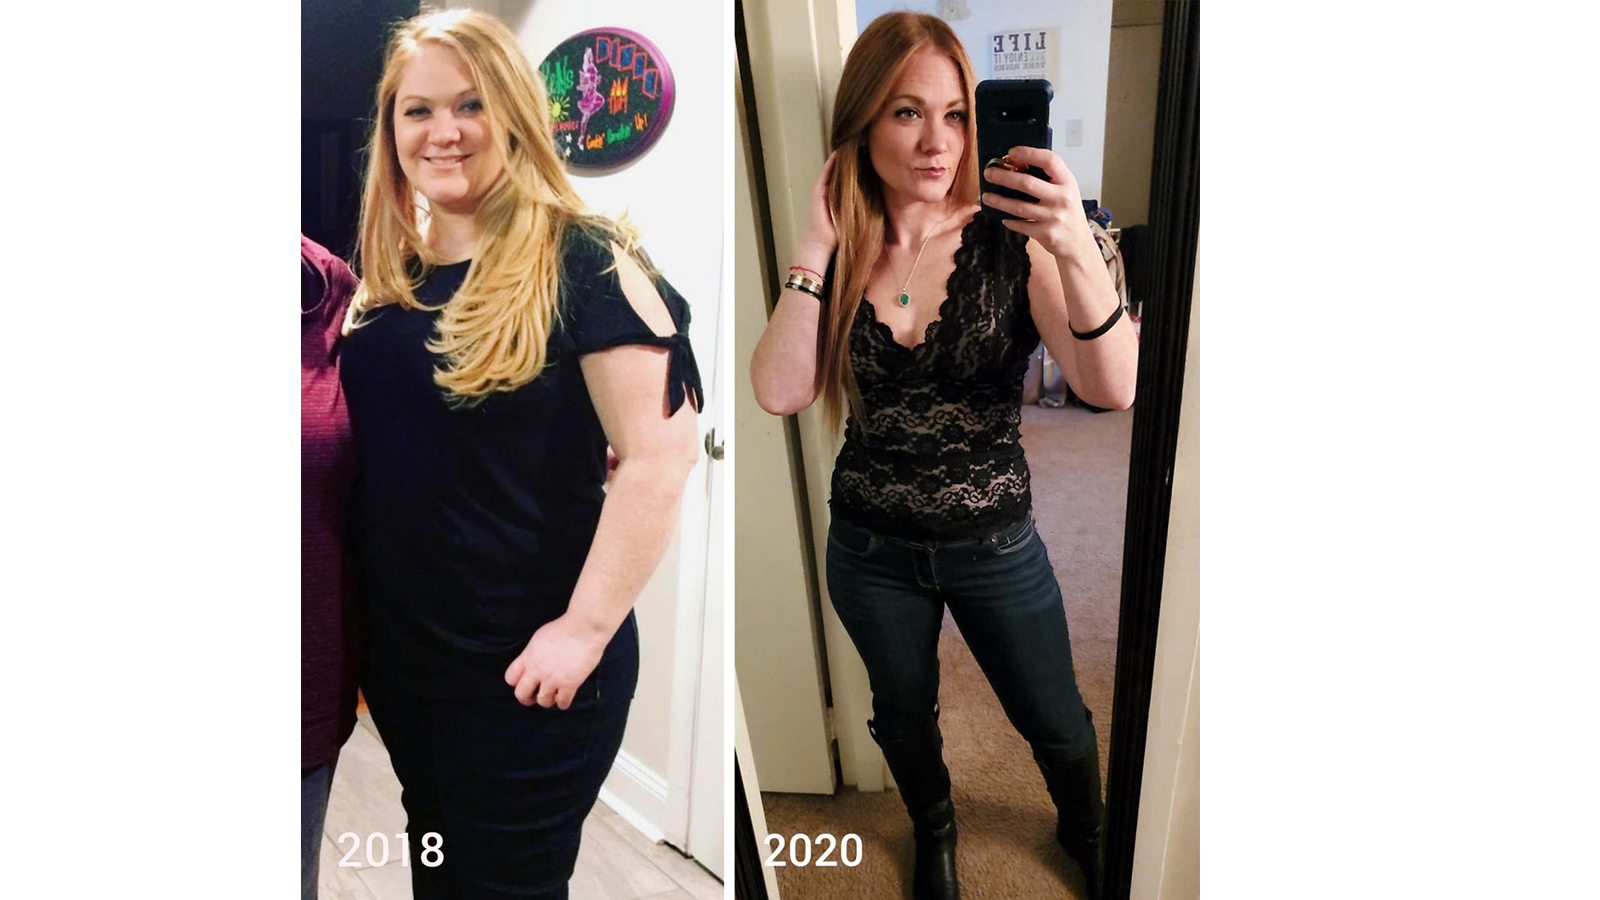 https://www.jeffersonhealth.org/content/dam/health2021/images/photos/photo-shoots/news/bariatric-surgery-patient-story-meghan.png